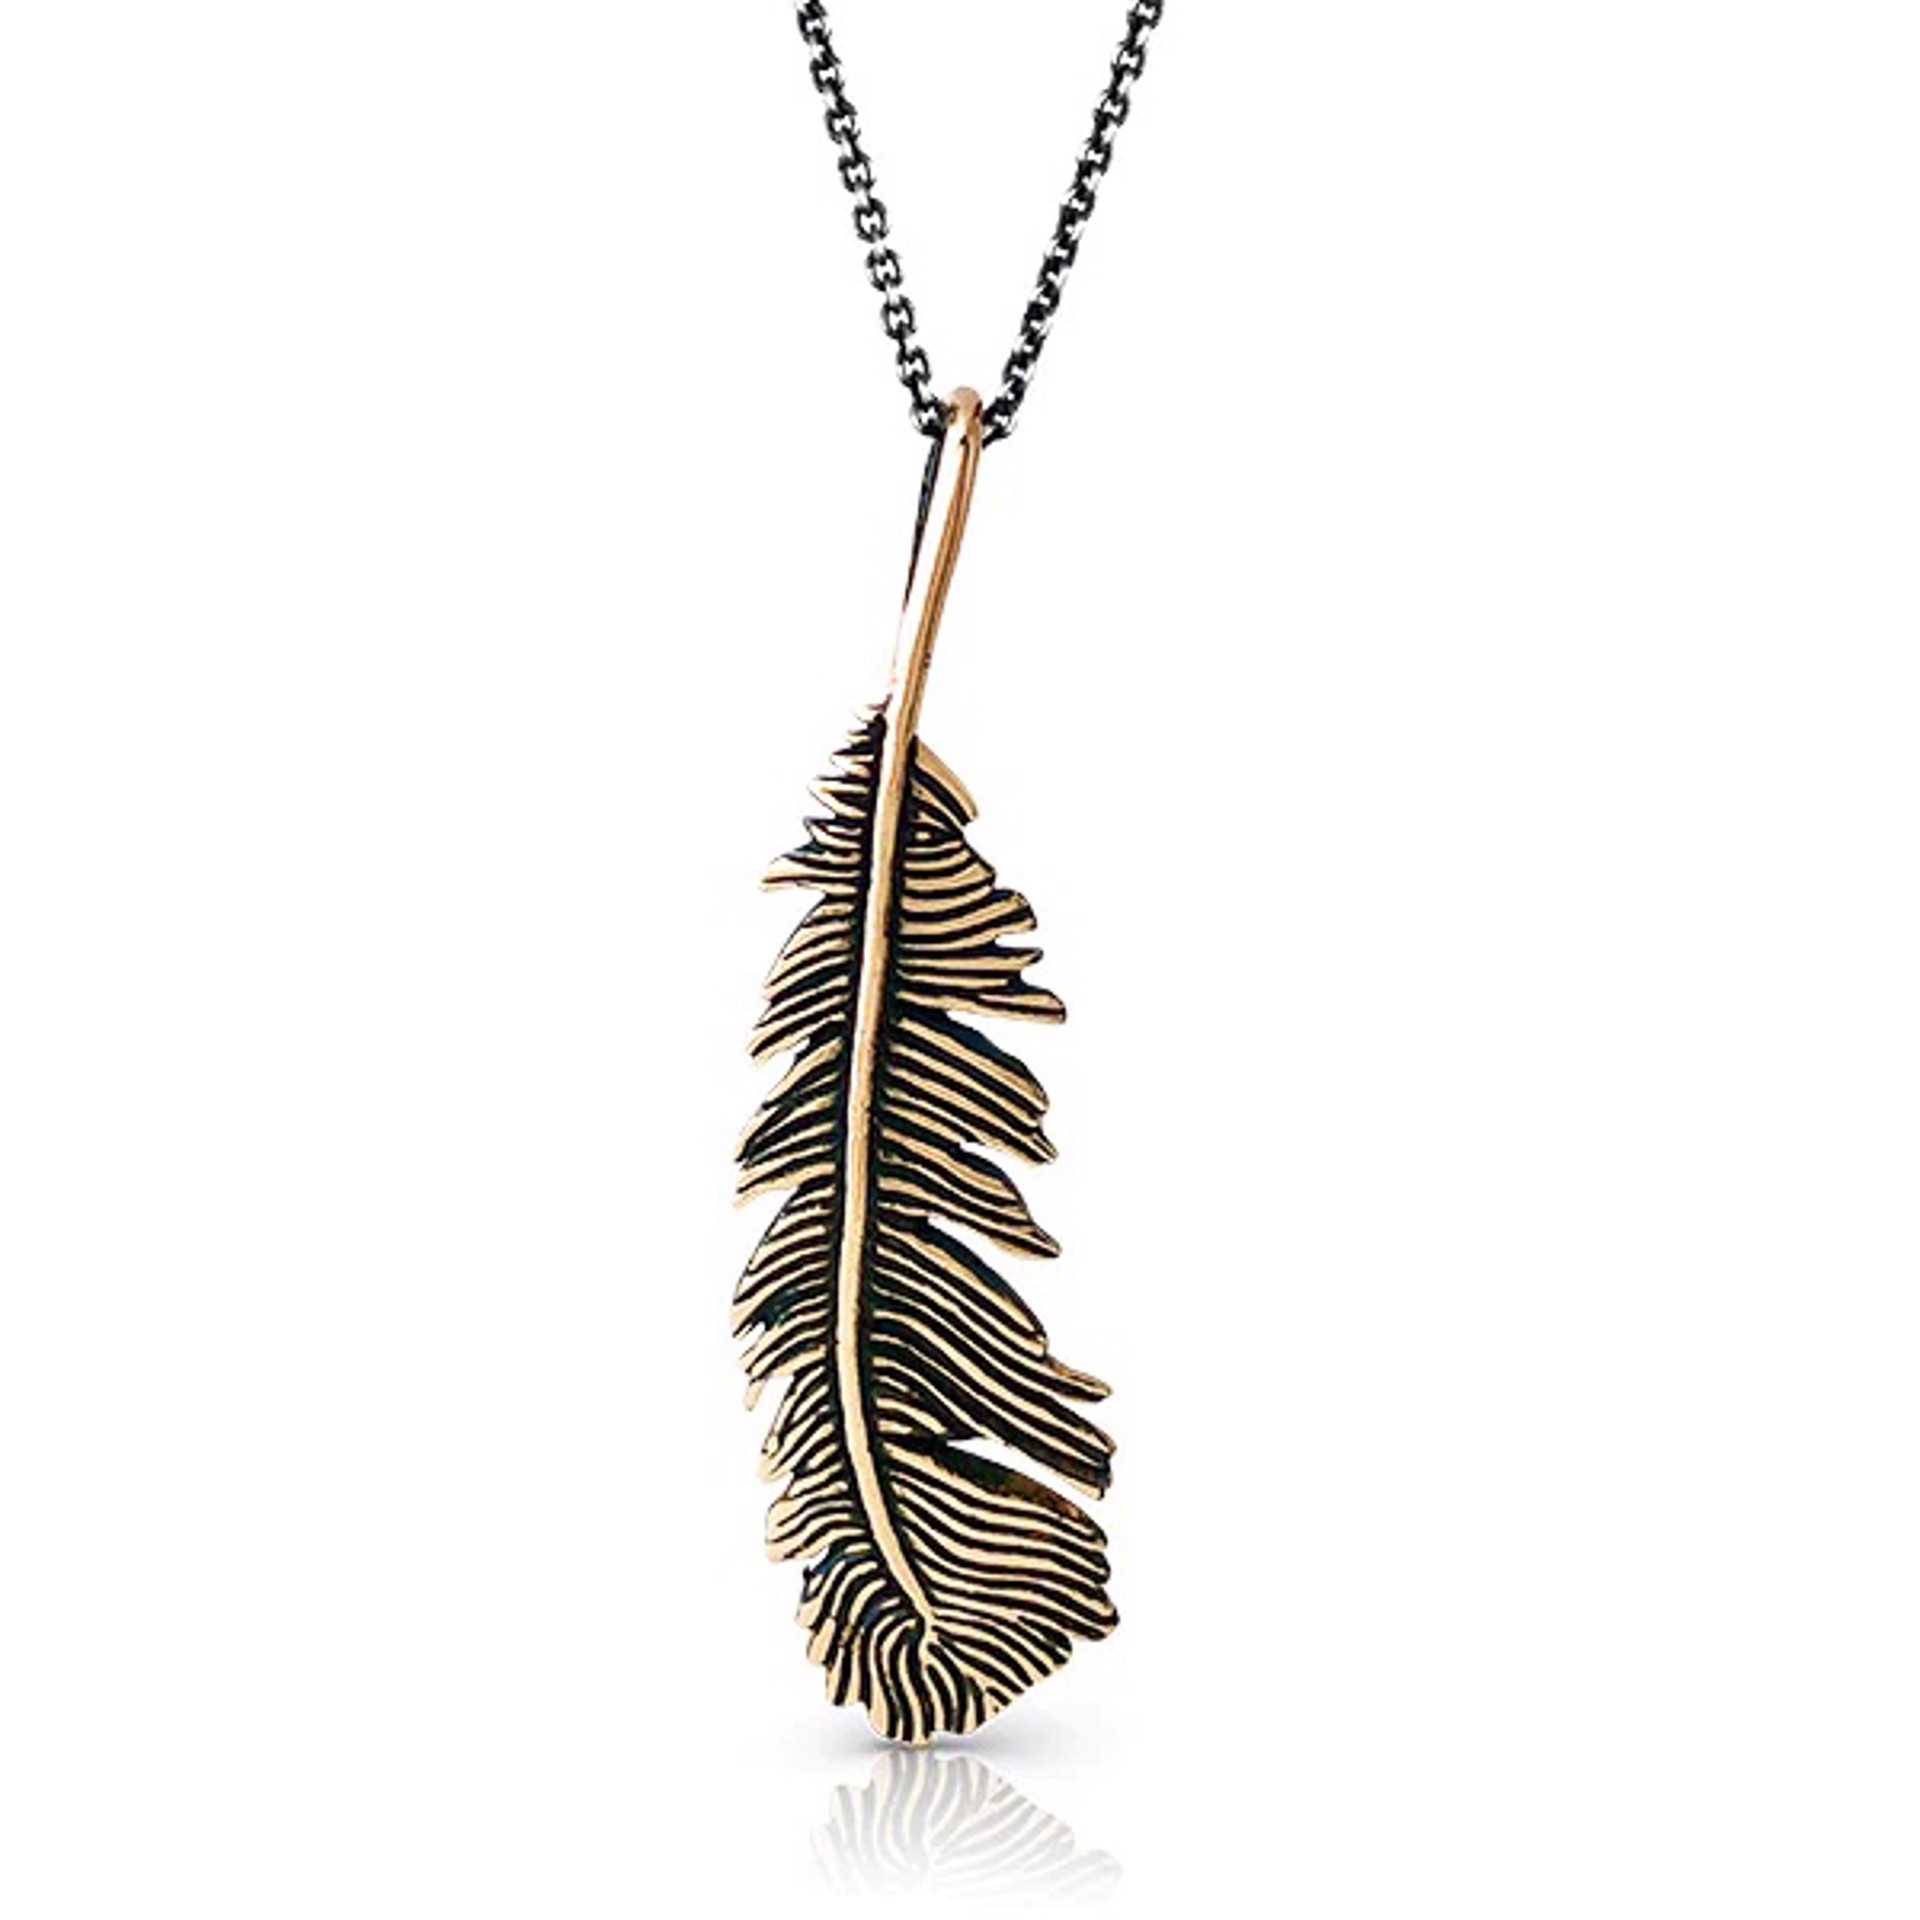 Bronze Feather Necklace by Louisa Berky